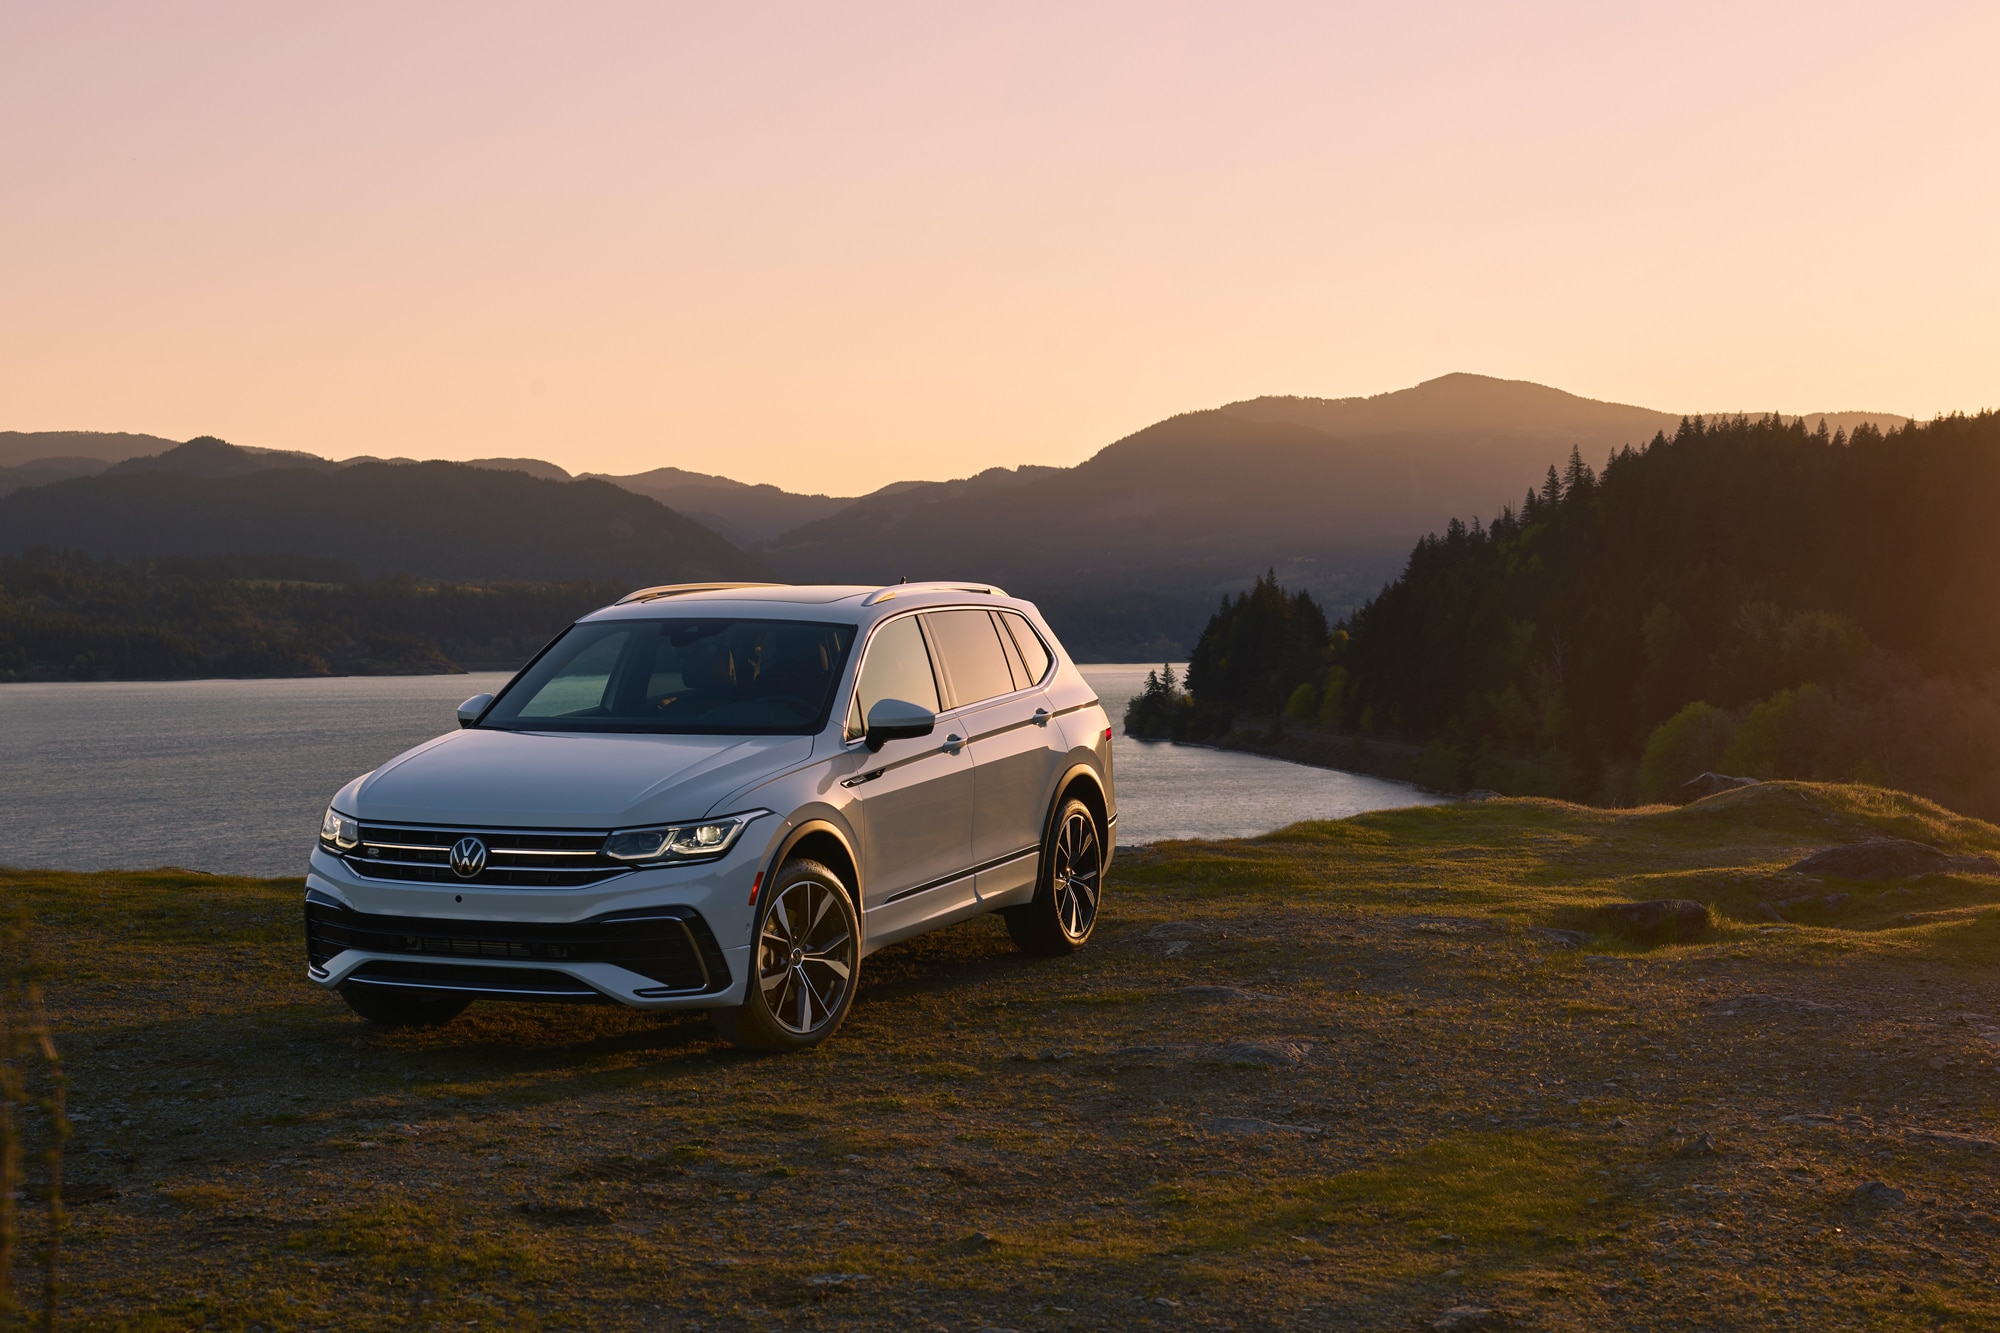 2022 Volkswagen Tiguan SEL R Line Oryx White parked on mountain side by lake